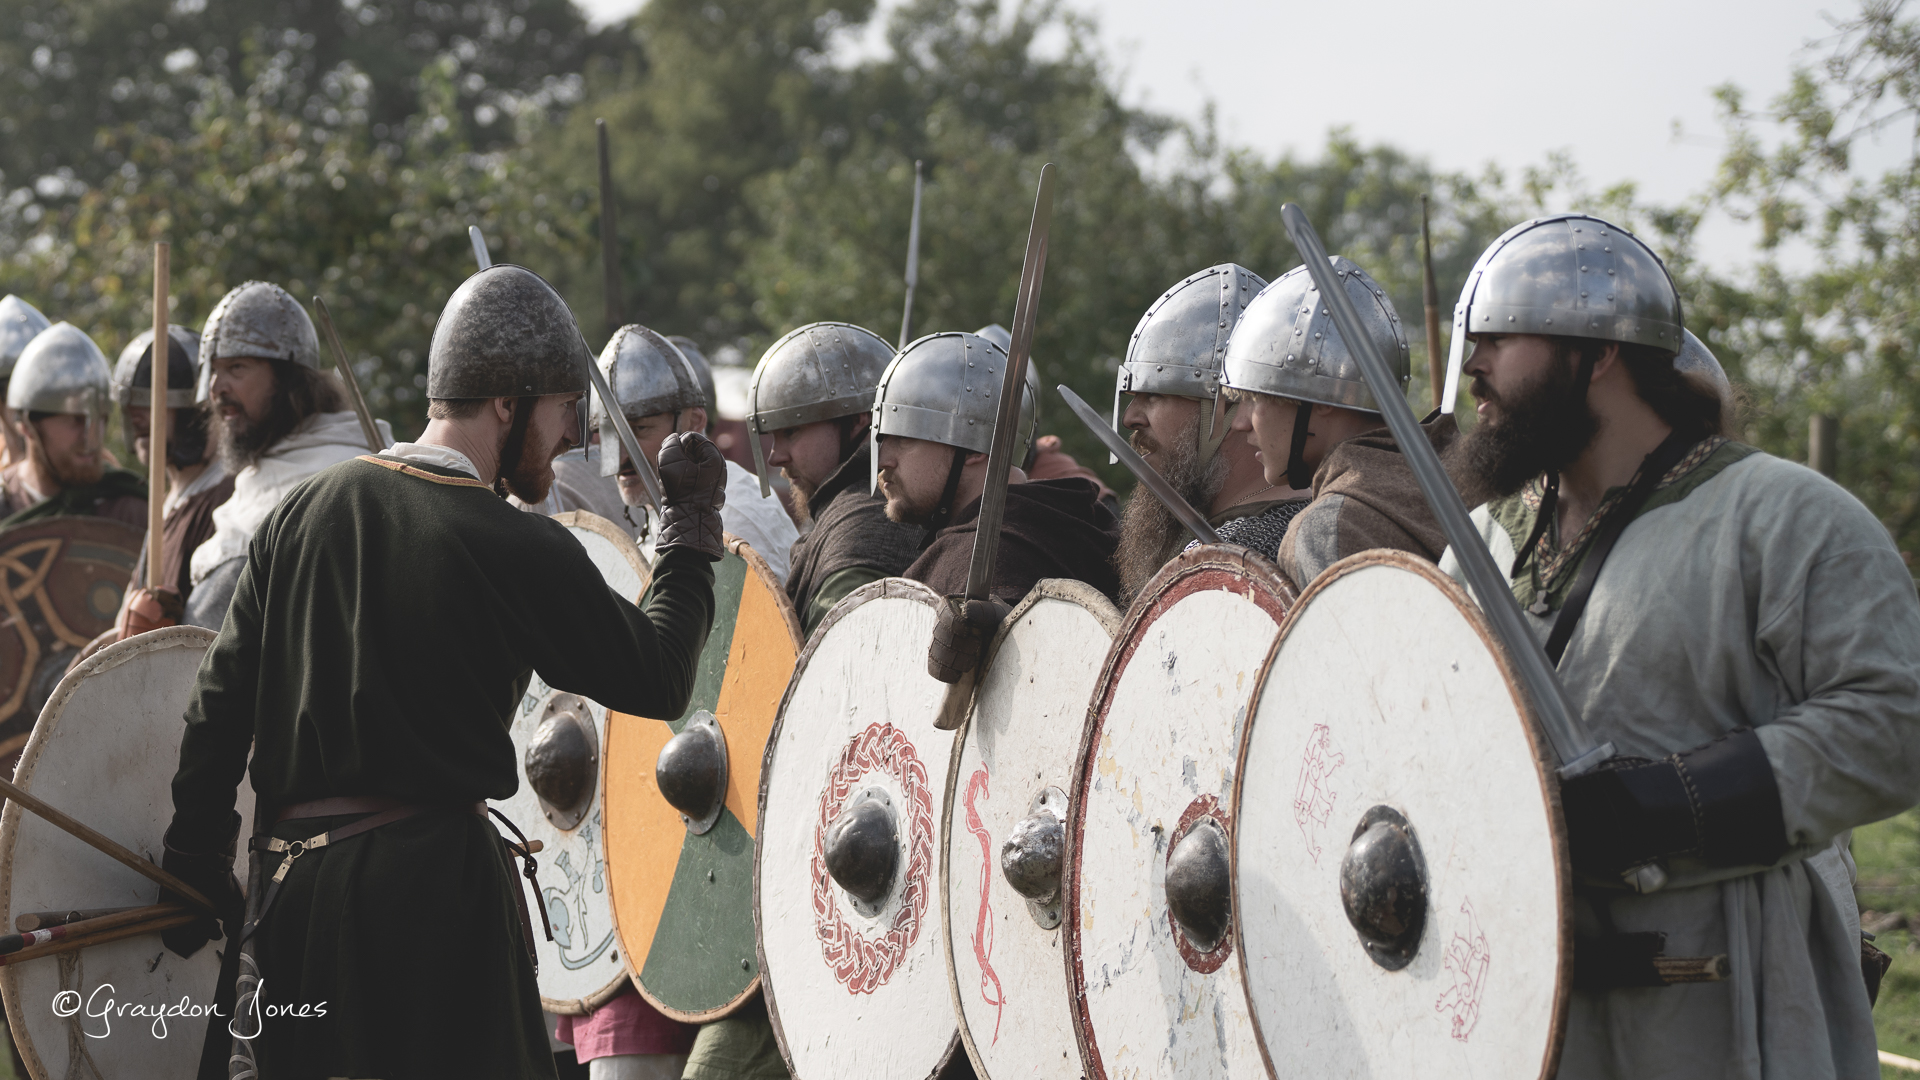 Hero Image, a combat image from a viking show